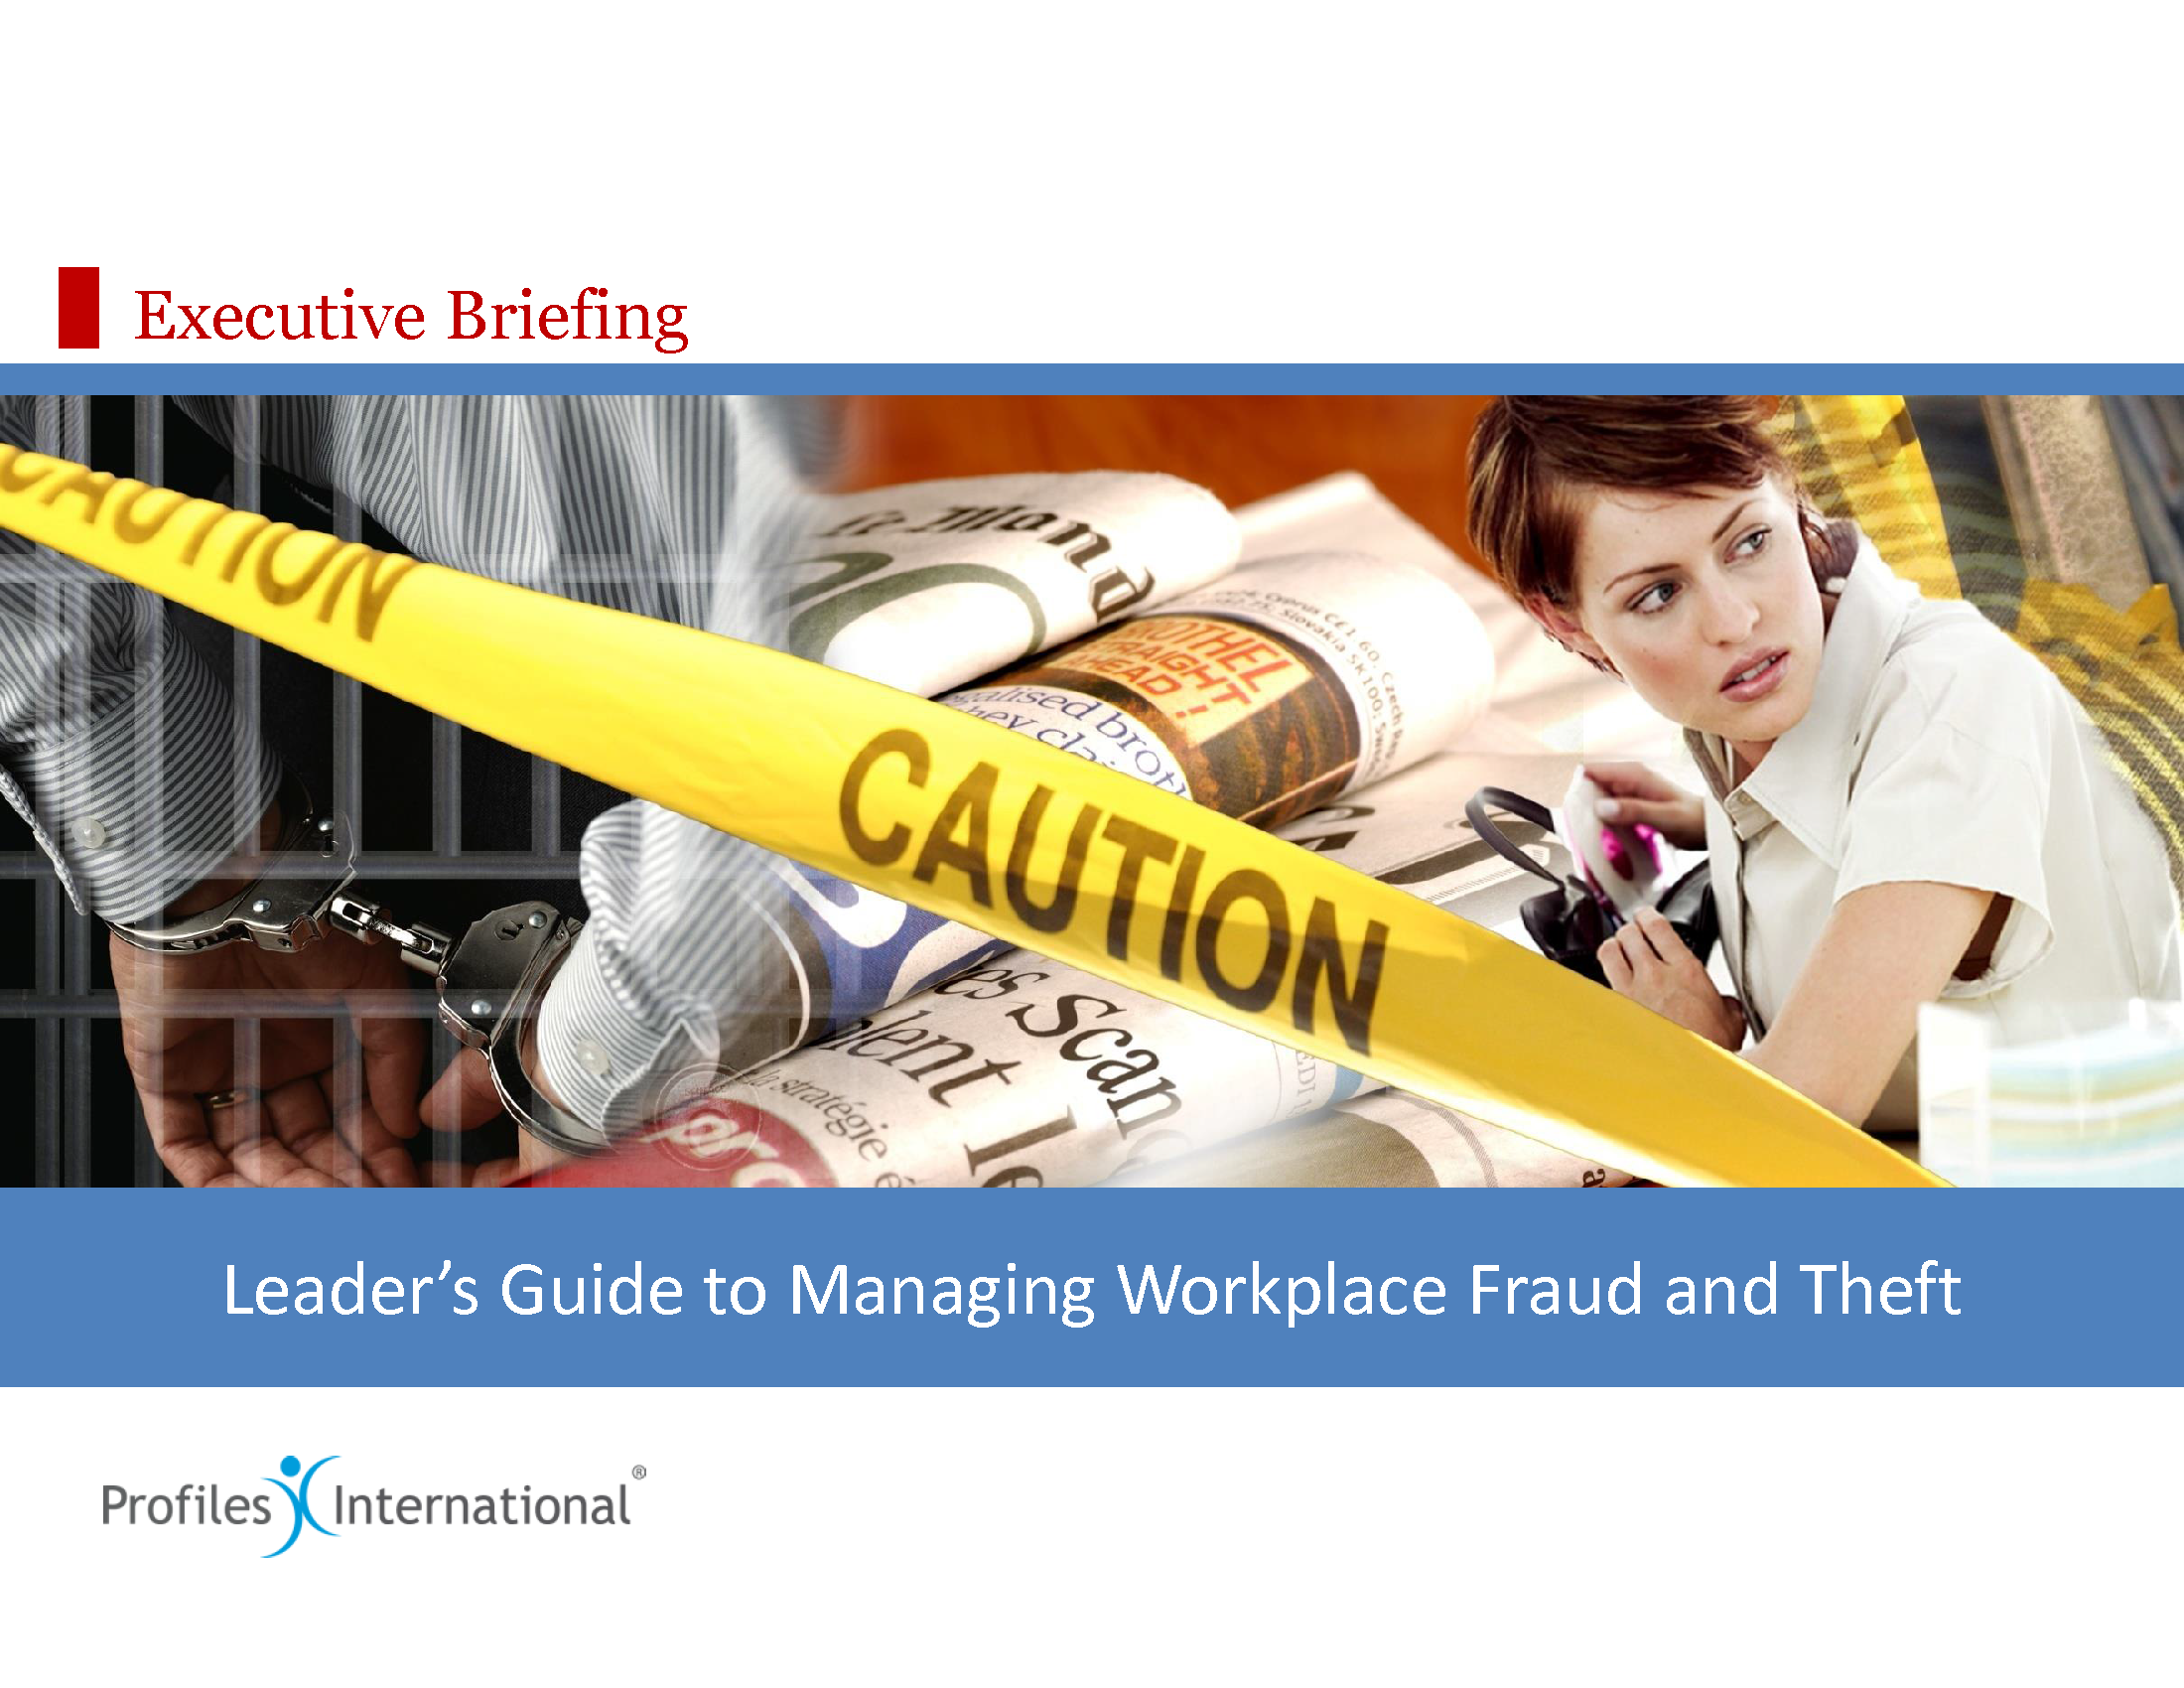 13-Leaders Guide to Managing Workplace Fraud, Theft, and Violence